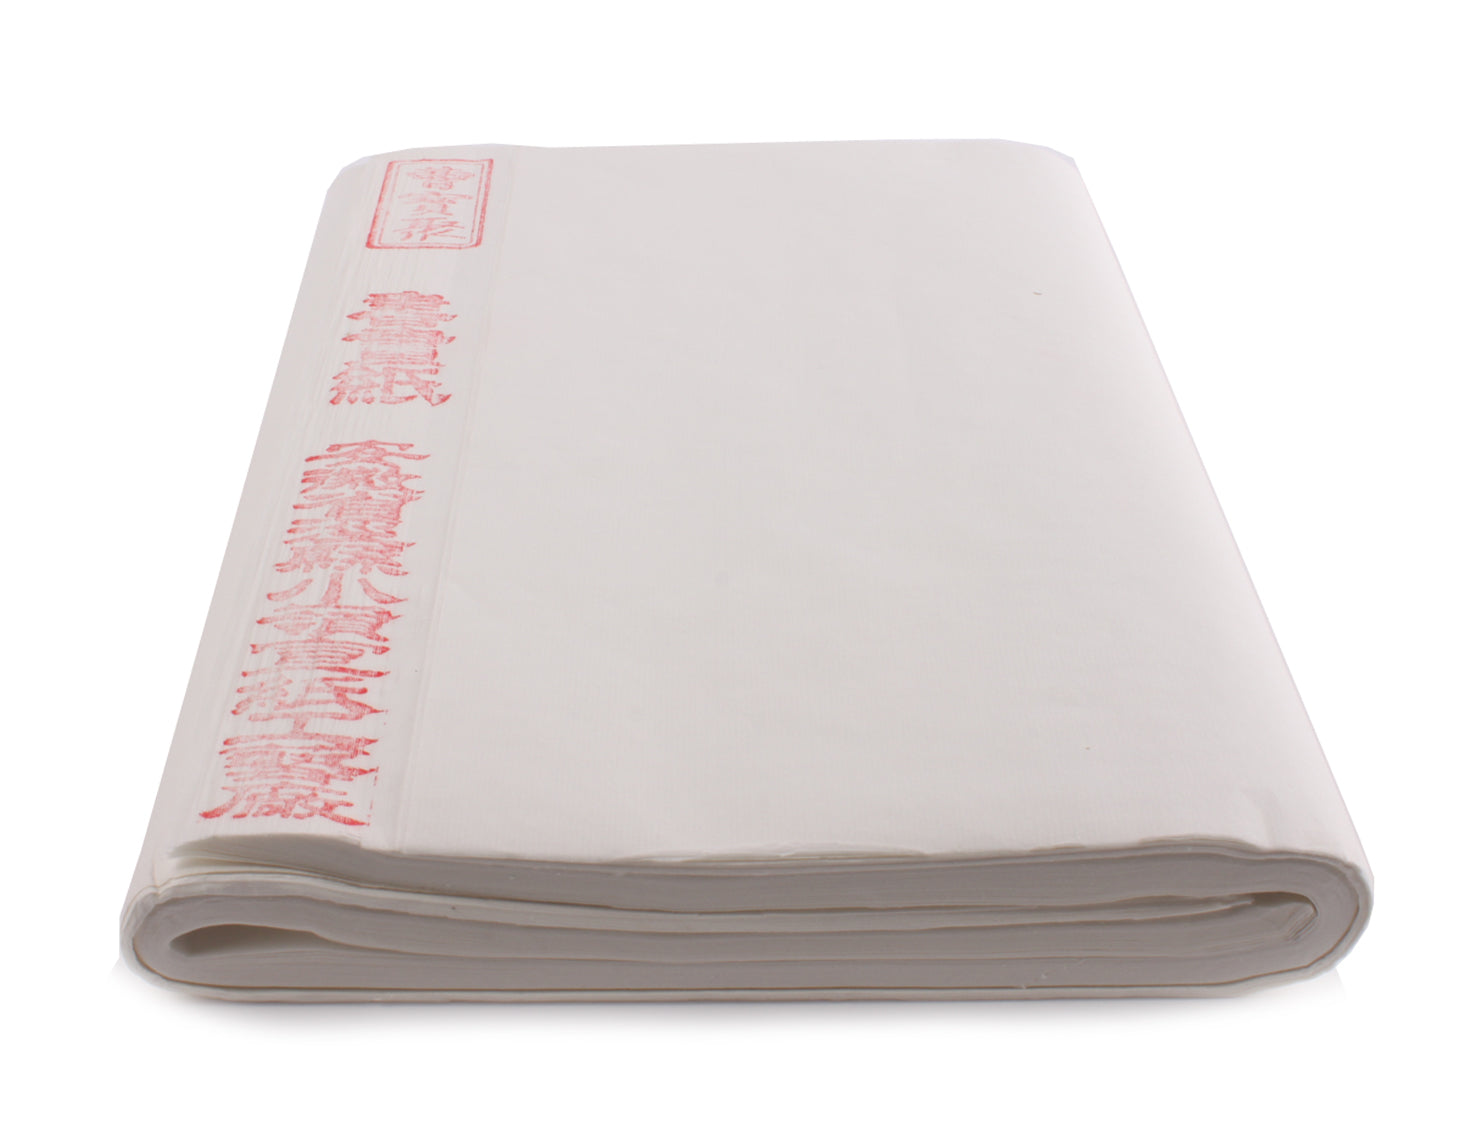 Factory Chinese Calligraphy White Blank Rice/Sumi/Xuan Paper for  Handwriting Ink Painting 100sheets - China XUAN paper, Chinese XUAN paper